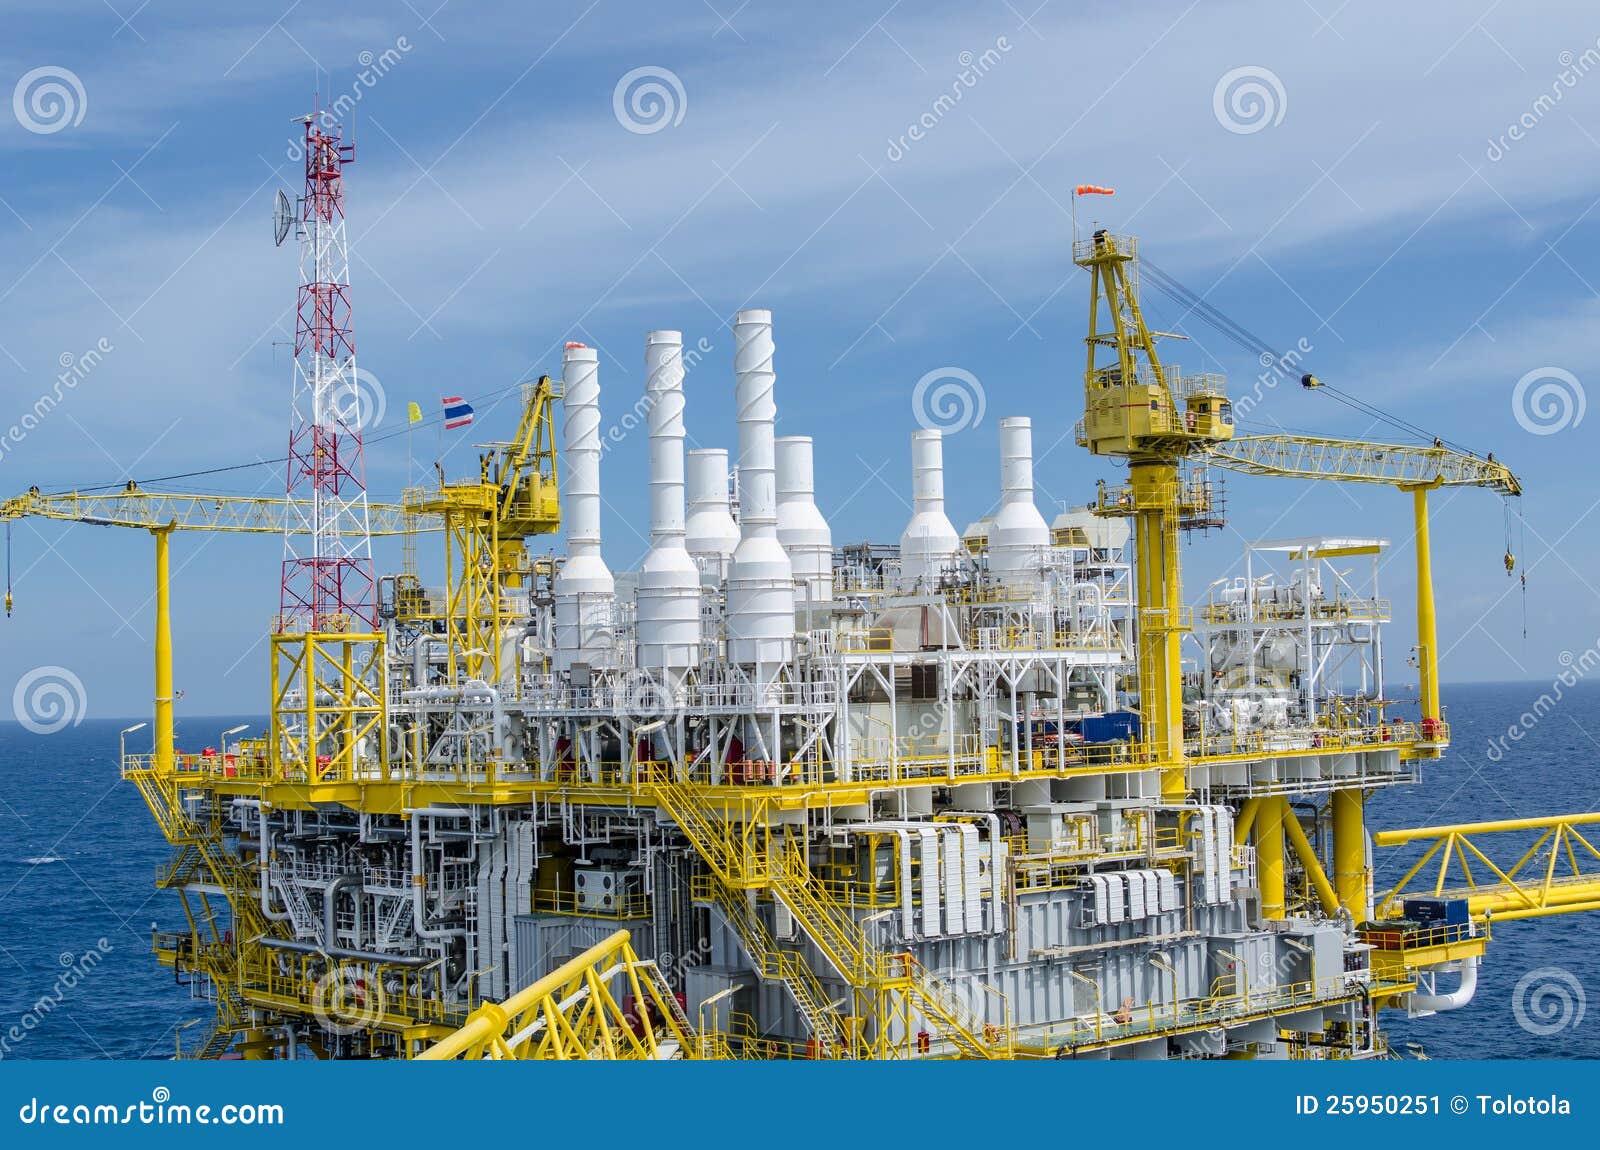 Offshore platform stock image. Image of power, clouds ...